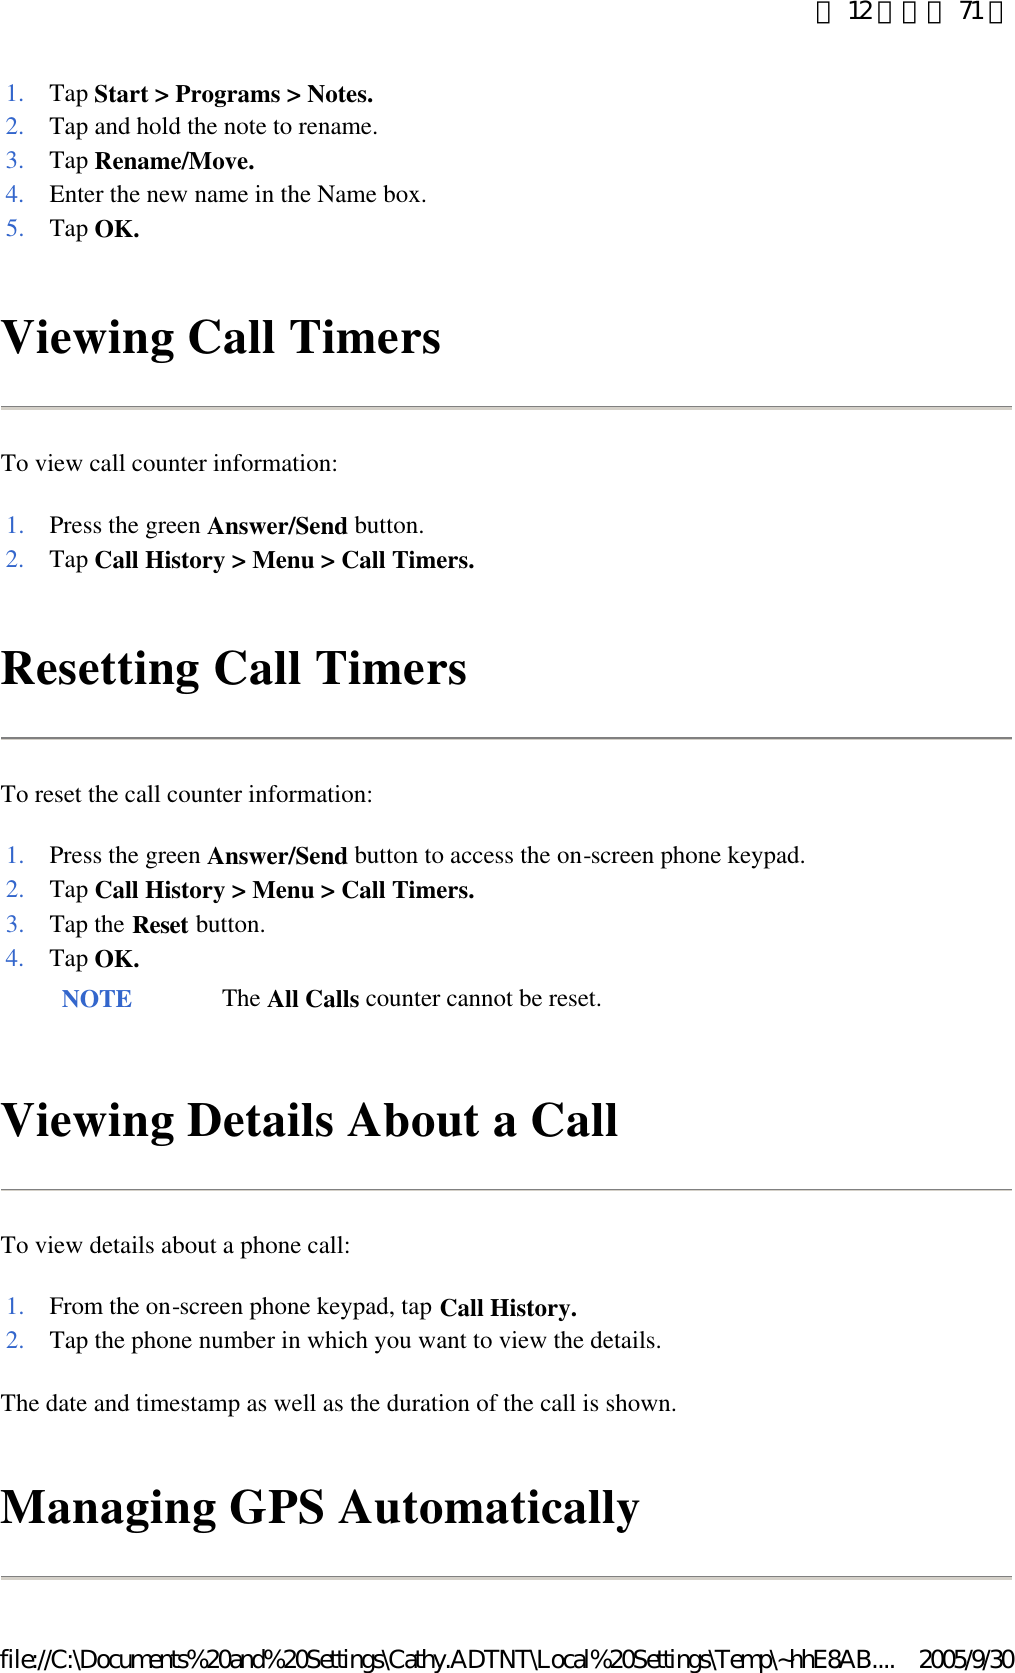 Viewing Call Timers To view call counter information: Resetting Call Timers  To reset the call counter information: Viewing Details About a Call  To view details about a phone call: The date and timestamp as well as the duration of the call is shown.  Managing GPS Automatically  1. Tap Start &gt; Programs &gt; Notes.2. Tap and hold the note to rename. 3. Tap Rename/Move.4.Enter the new name in the Name box. 5. Tap OK.1. Press the green Answer/Send button. 2. Tap Call History &gt; Menu &gt; Call Timers.1. Press the green Answer/Send button to access the on-screen phone keypad. 2. Tap Call History &gt; Menu &gt; Call Timers.3. Tap the Reset button. 4. Tap OK. NOTE The All Calls counter cannot be reset. 1. From the on-screen phone keypad, tap Call History.2.Tap the phone number in which you want to view the details. 第 12 頁，共 71 頁2005/9/30file://C:\Documents%20and%20Settings\Cathy.ADTNT\Local%20Settings\Temp\~hhE8AB....